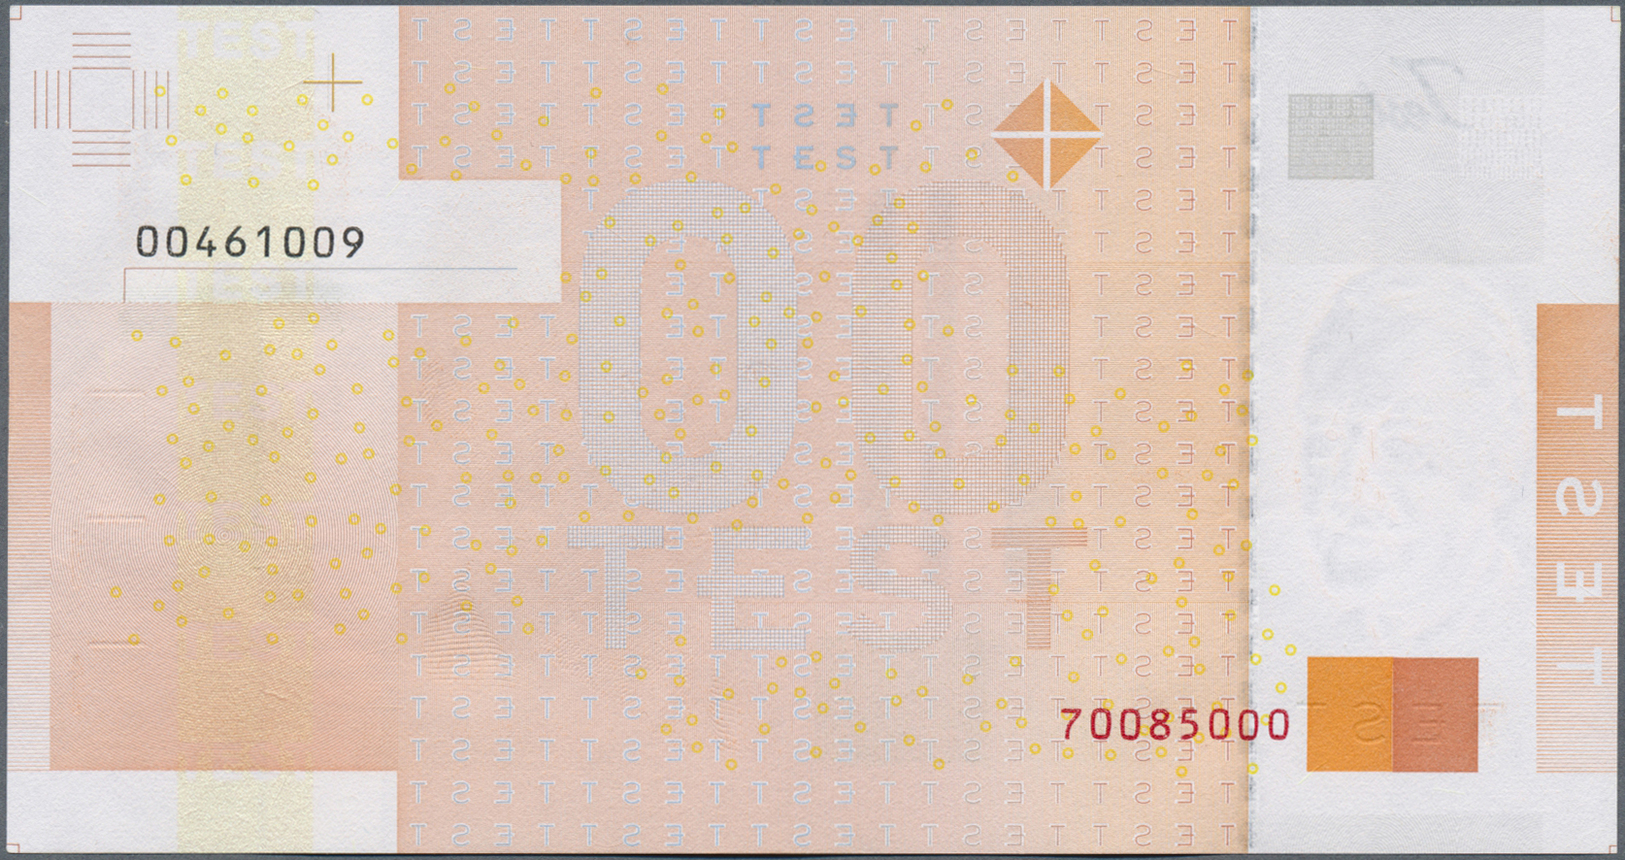 03539 Testbanknoten: Euro Test Banknote Produced By The EUROPEAN CENTRAL BANK As A Trial During The Development Of The E - Fictifs & Spécimens